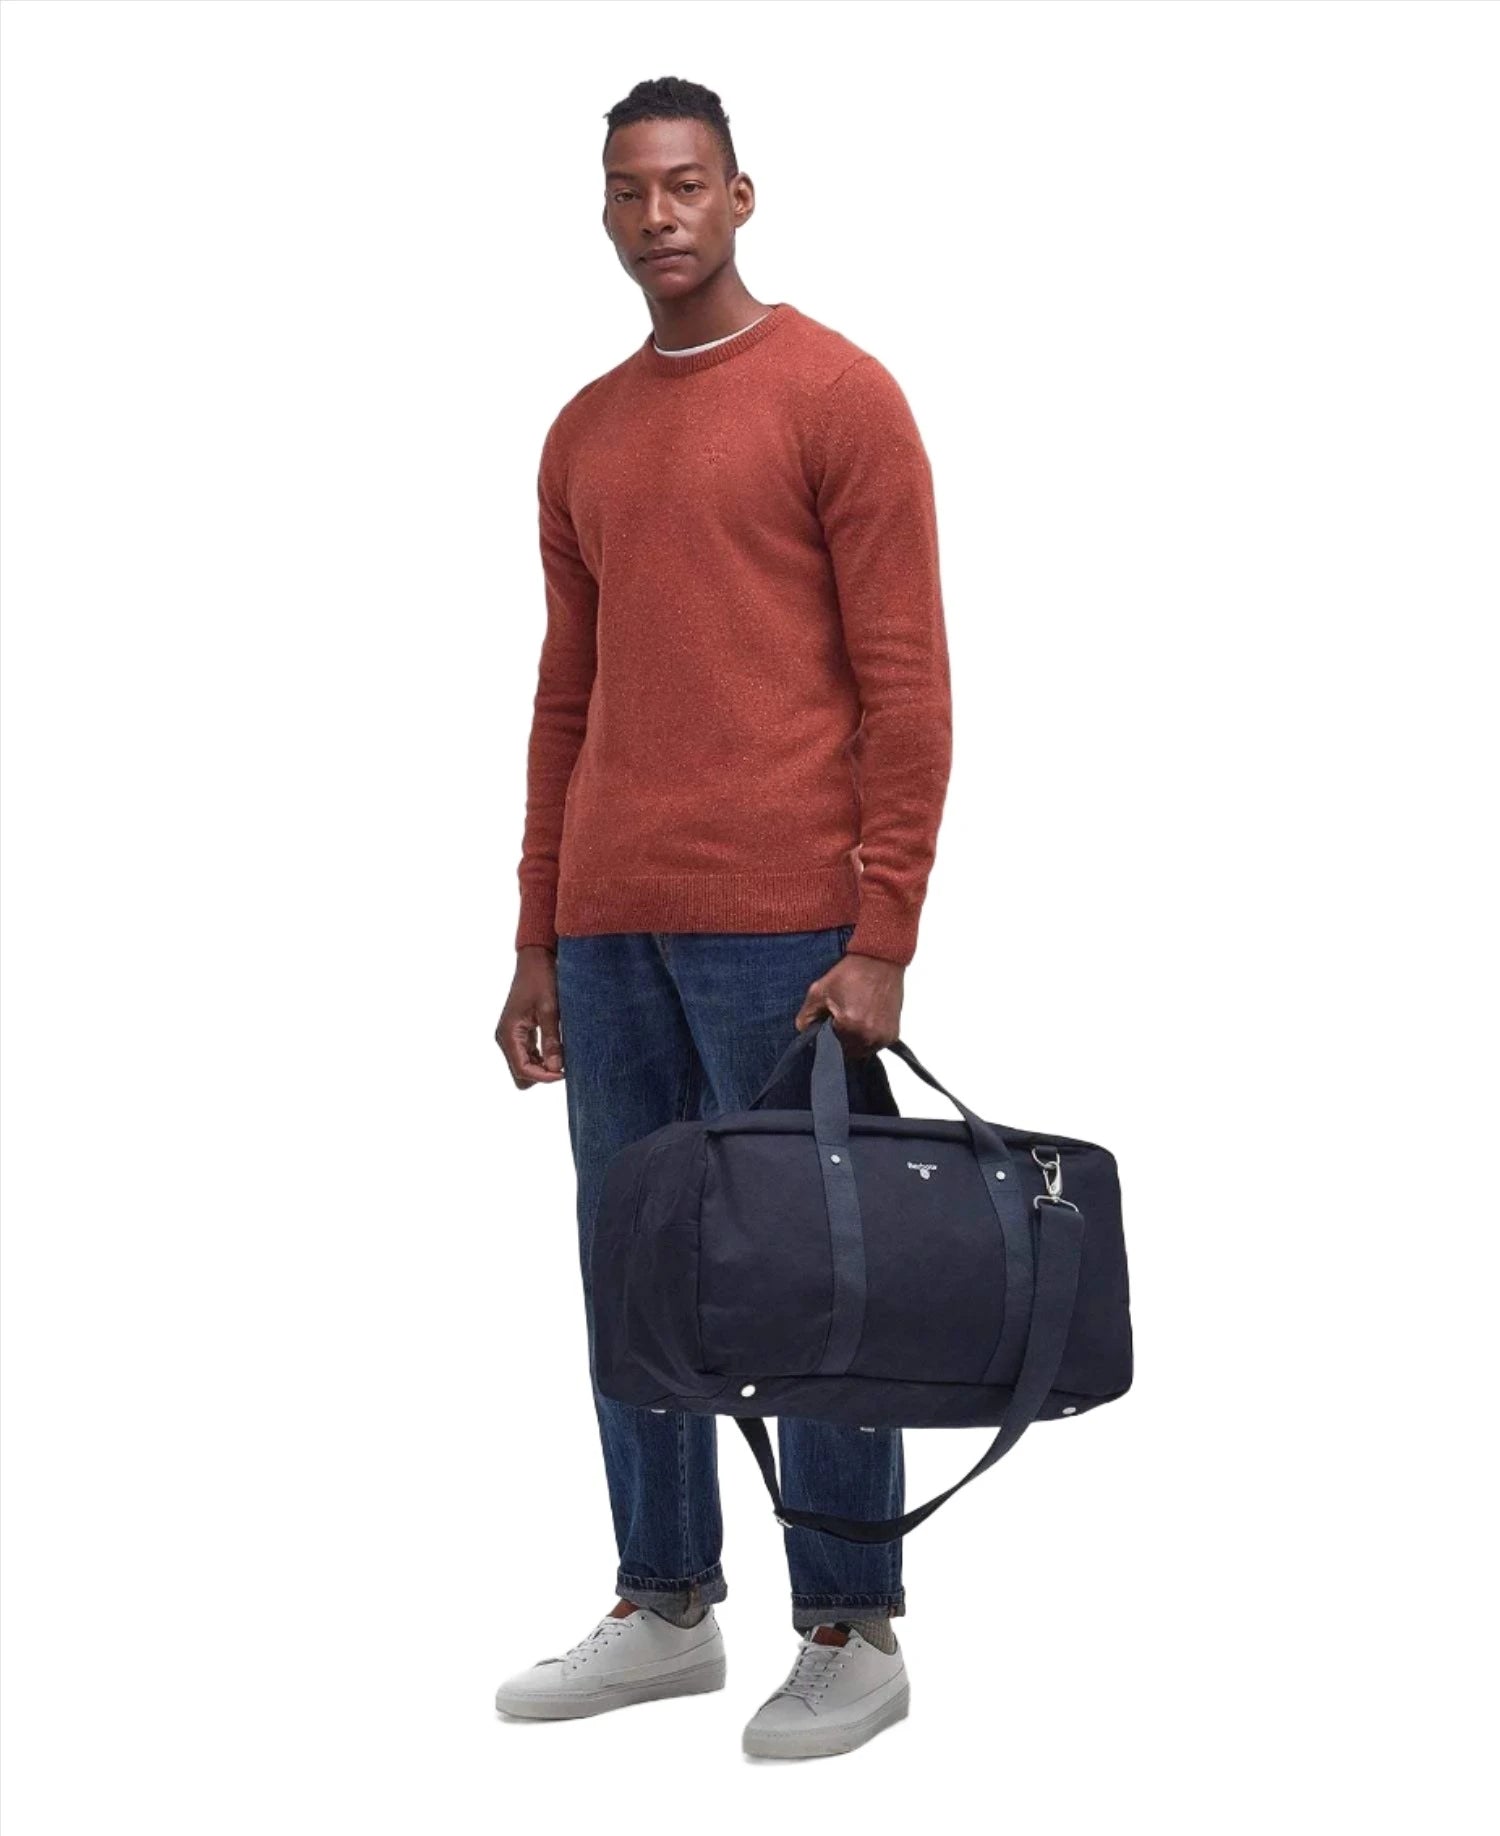 Barbour Cascade Holdall - The Luxury Promotional Gifts Company Limited